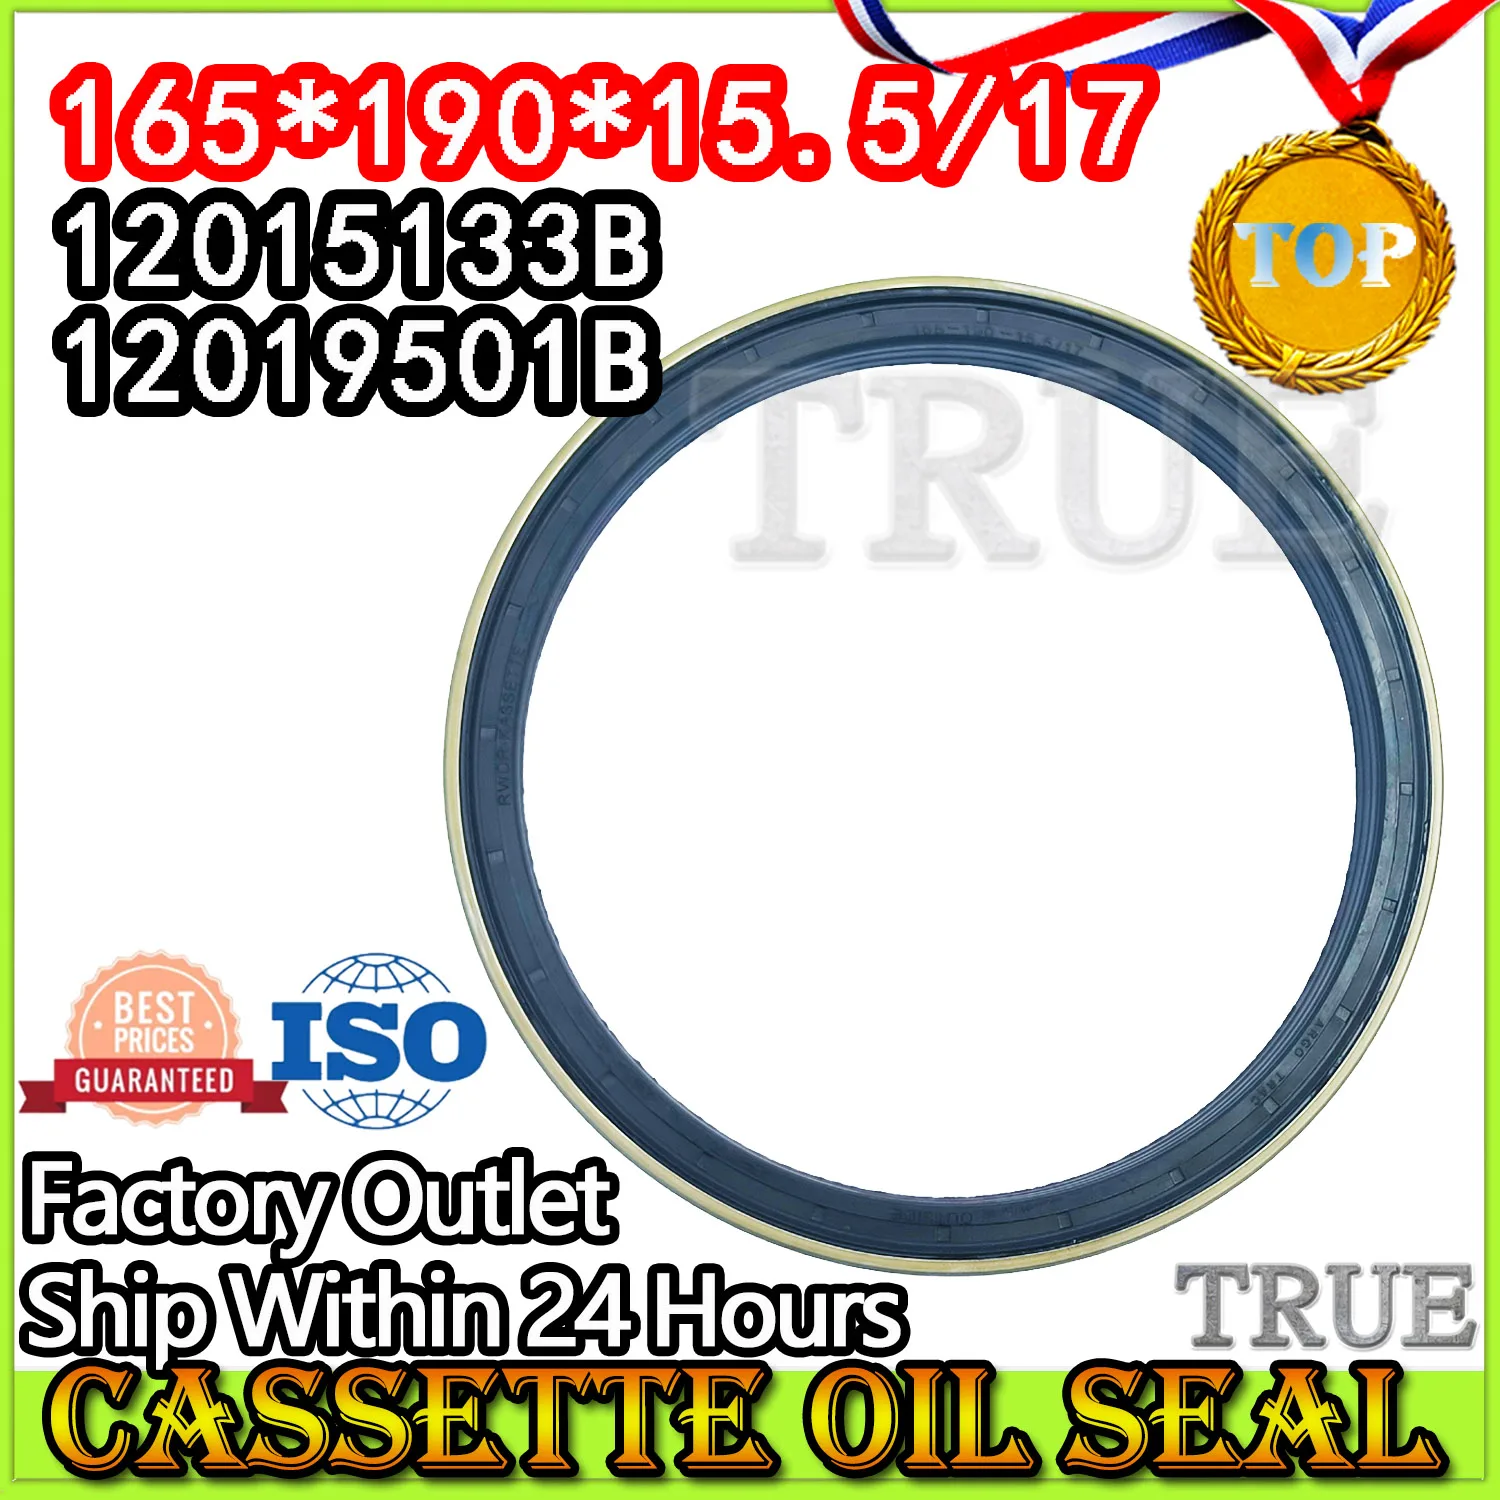 

Hub Oil Seal 165*190*15.5/17 For Tractor Cat 12015133 165X190X15.5/17 Parts MOTOR Construction Tool Set Pack ISO 9001:2008 Shaft